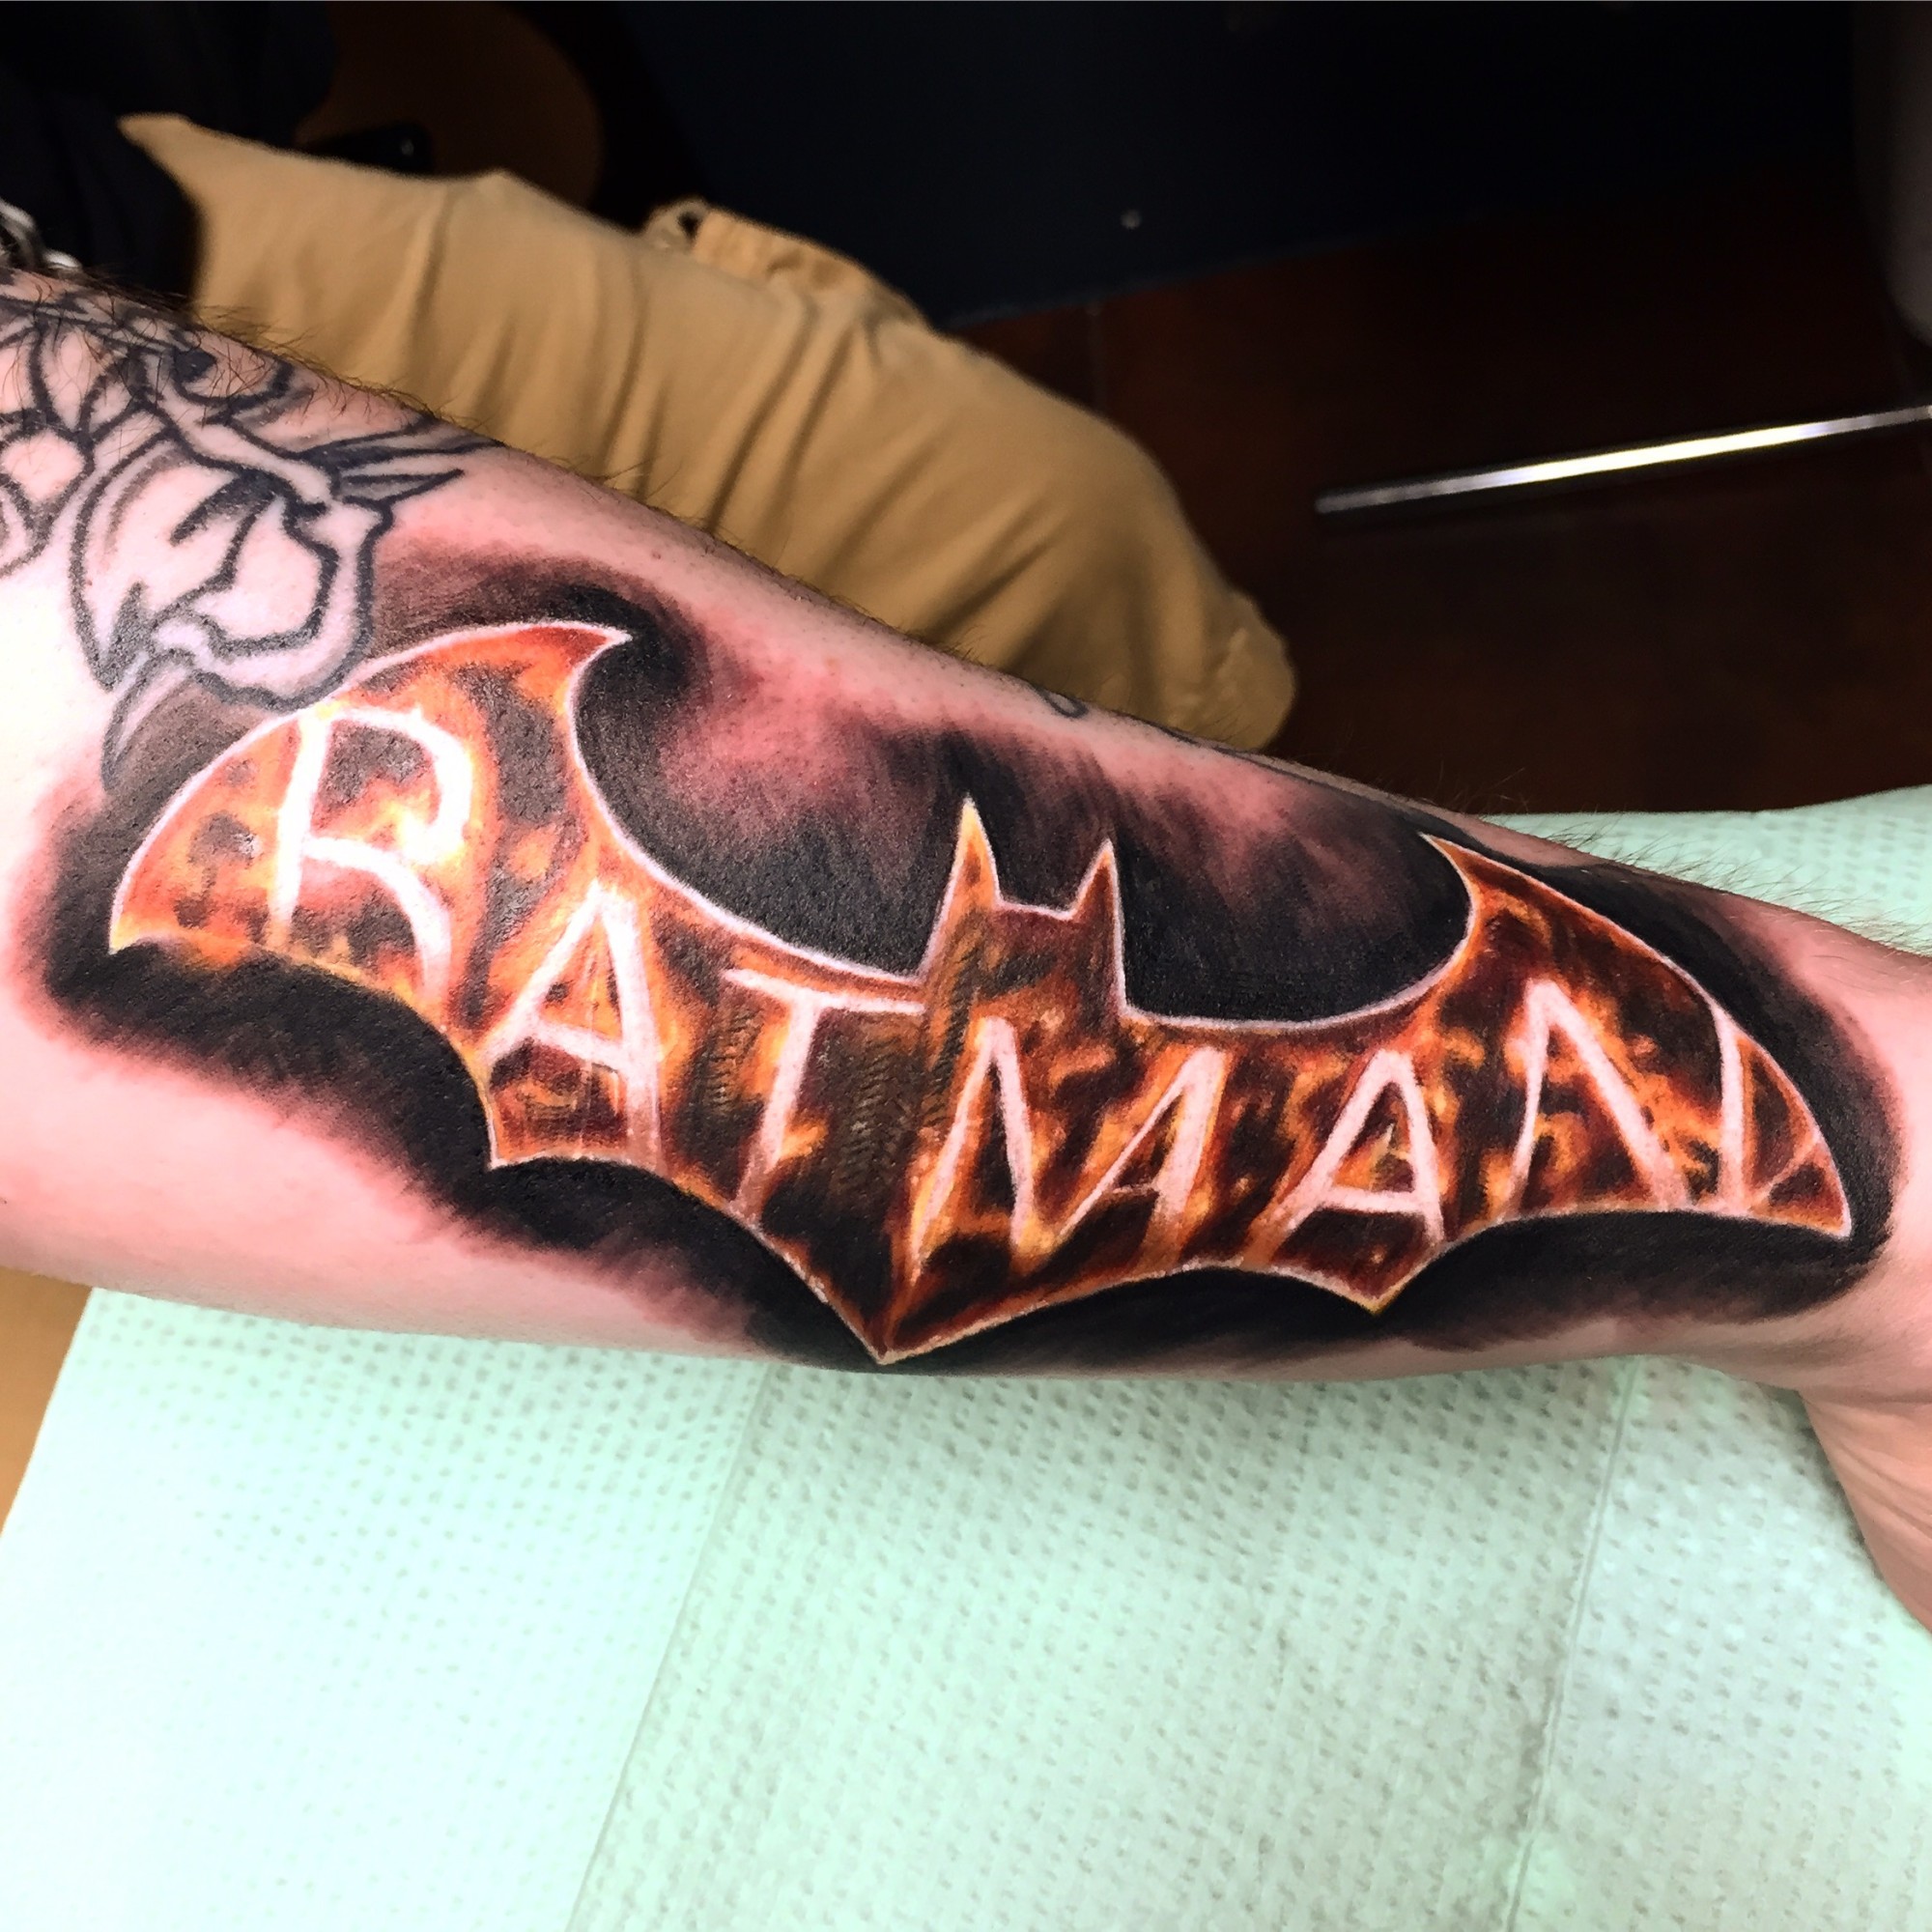 190 Batman Tattoos To Bring Out Your Inner Superhero